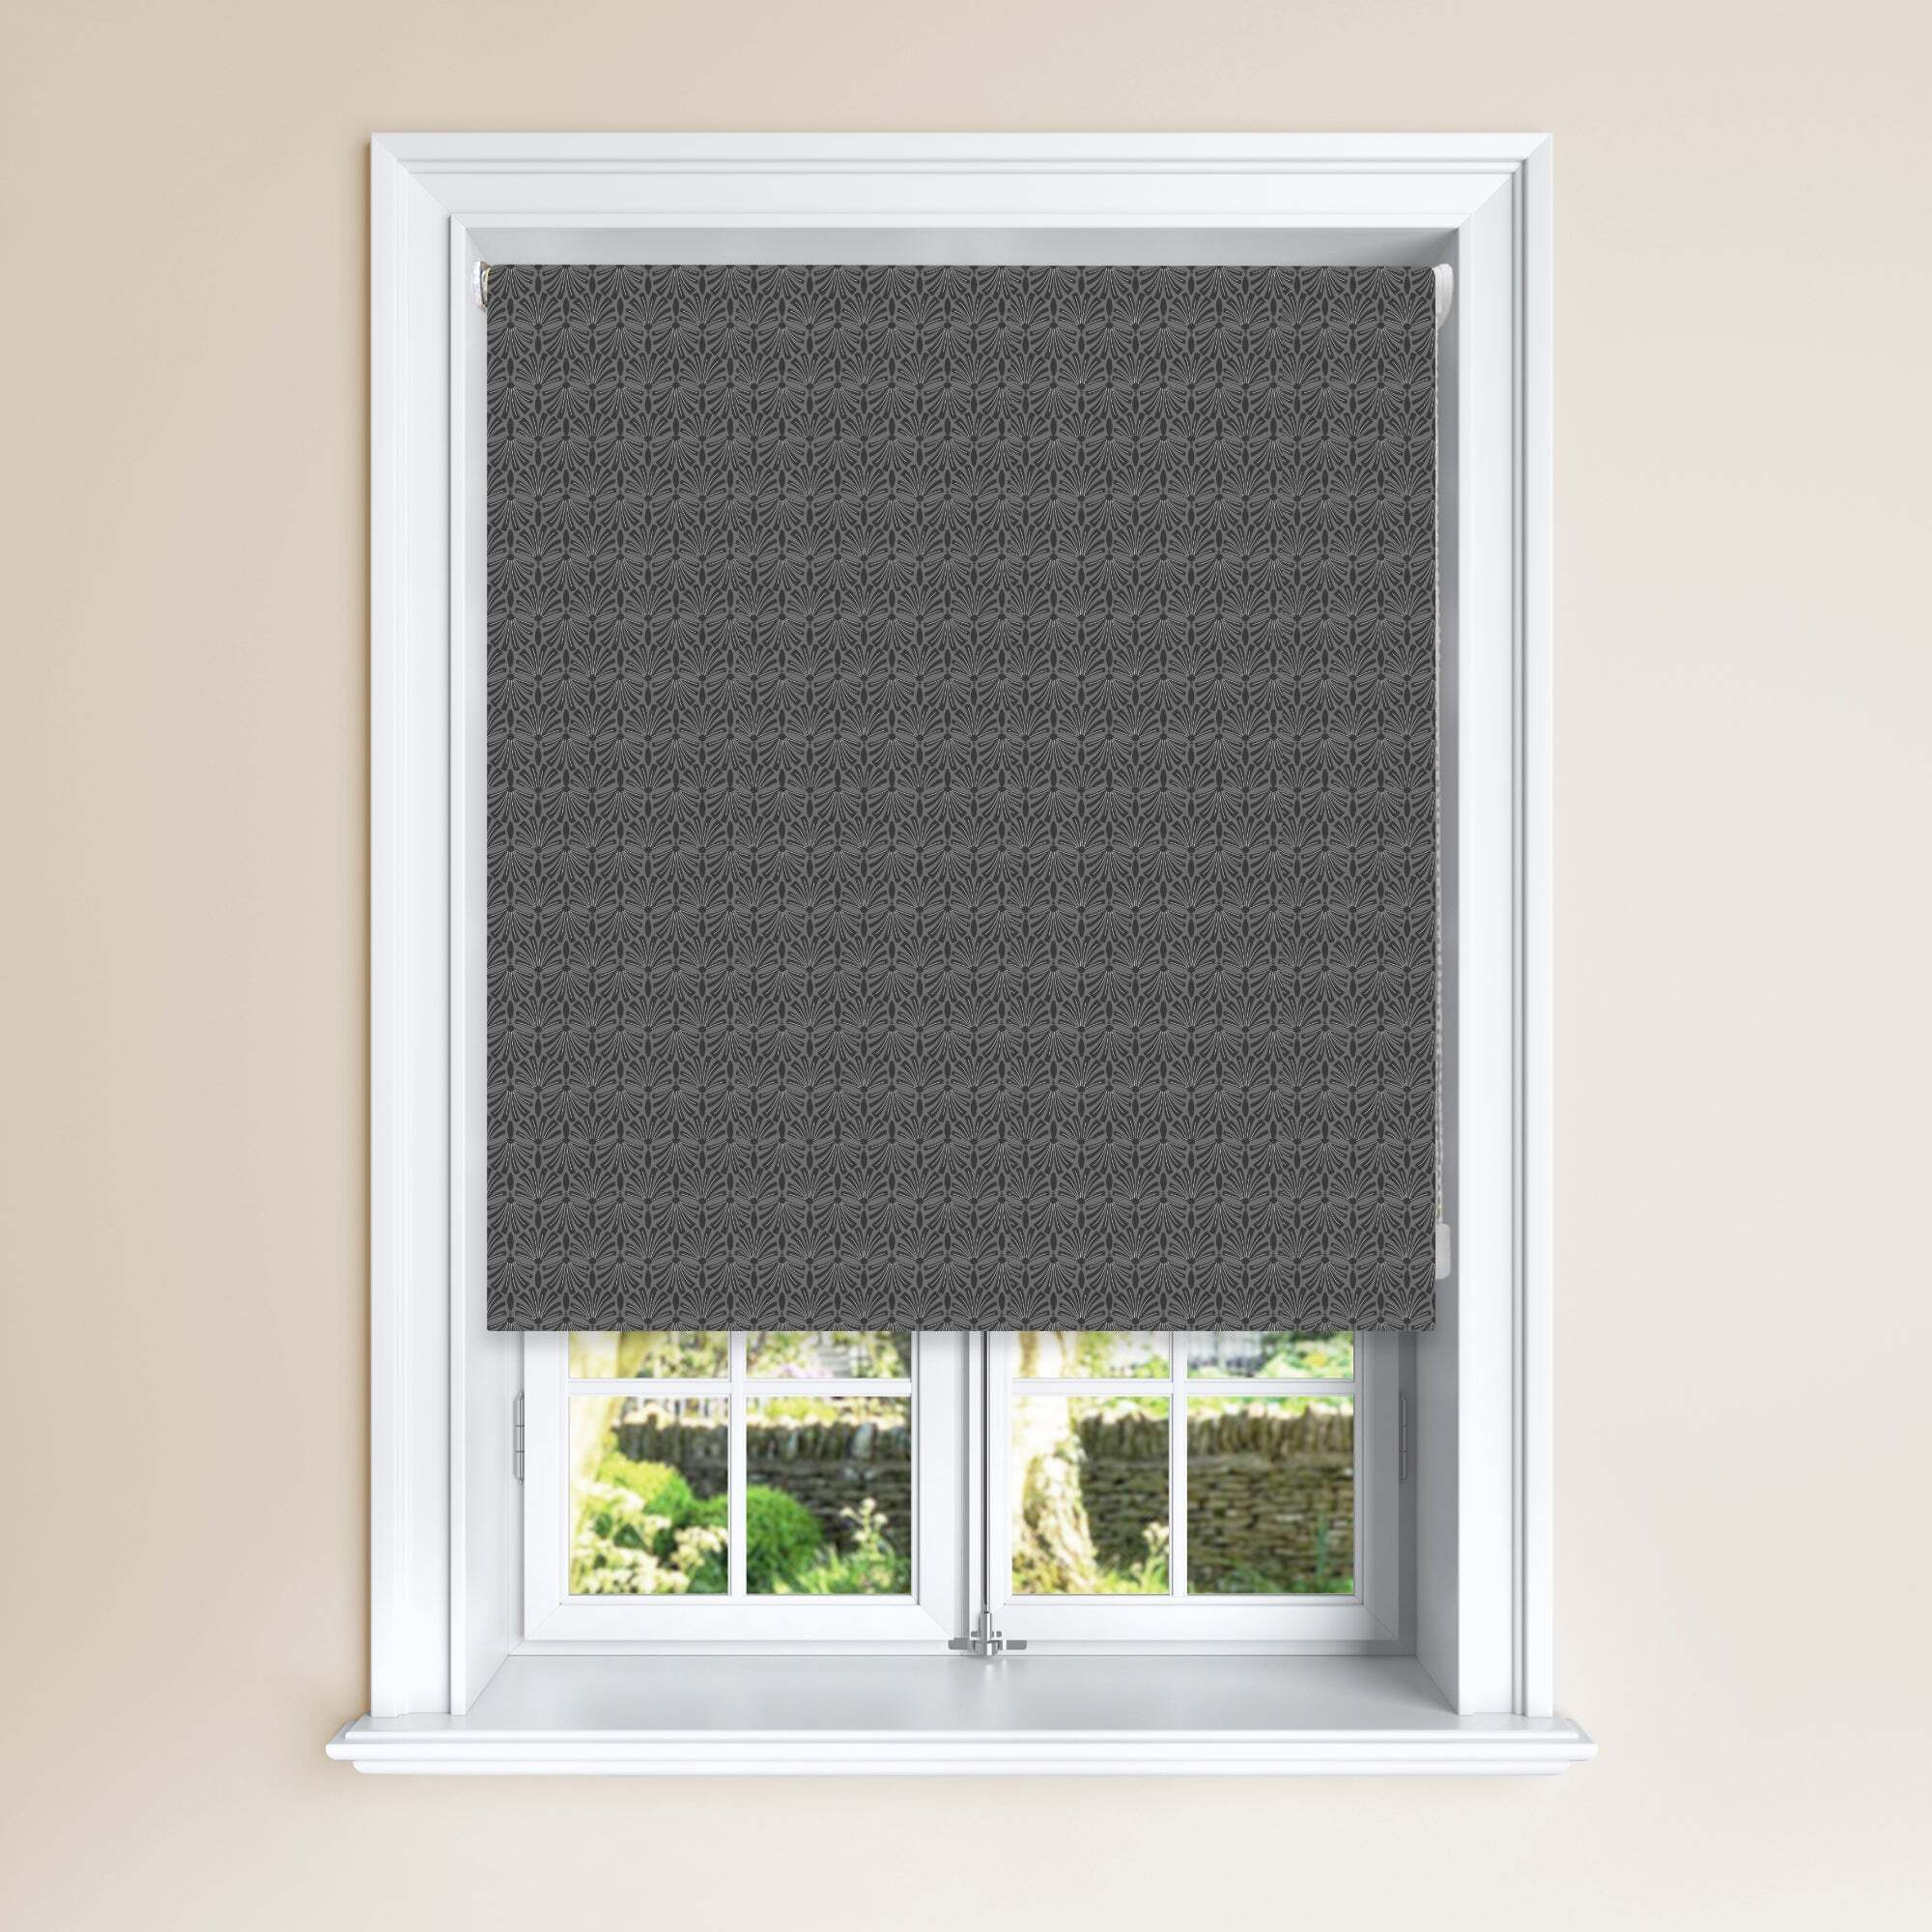 Fan Charcoal Geometric Blackout Roller Blind Charcoal and White